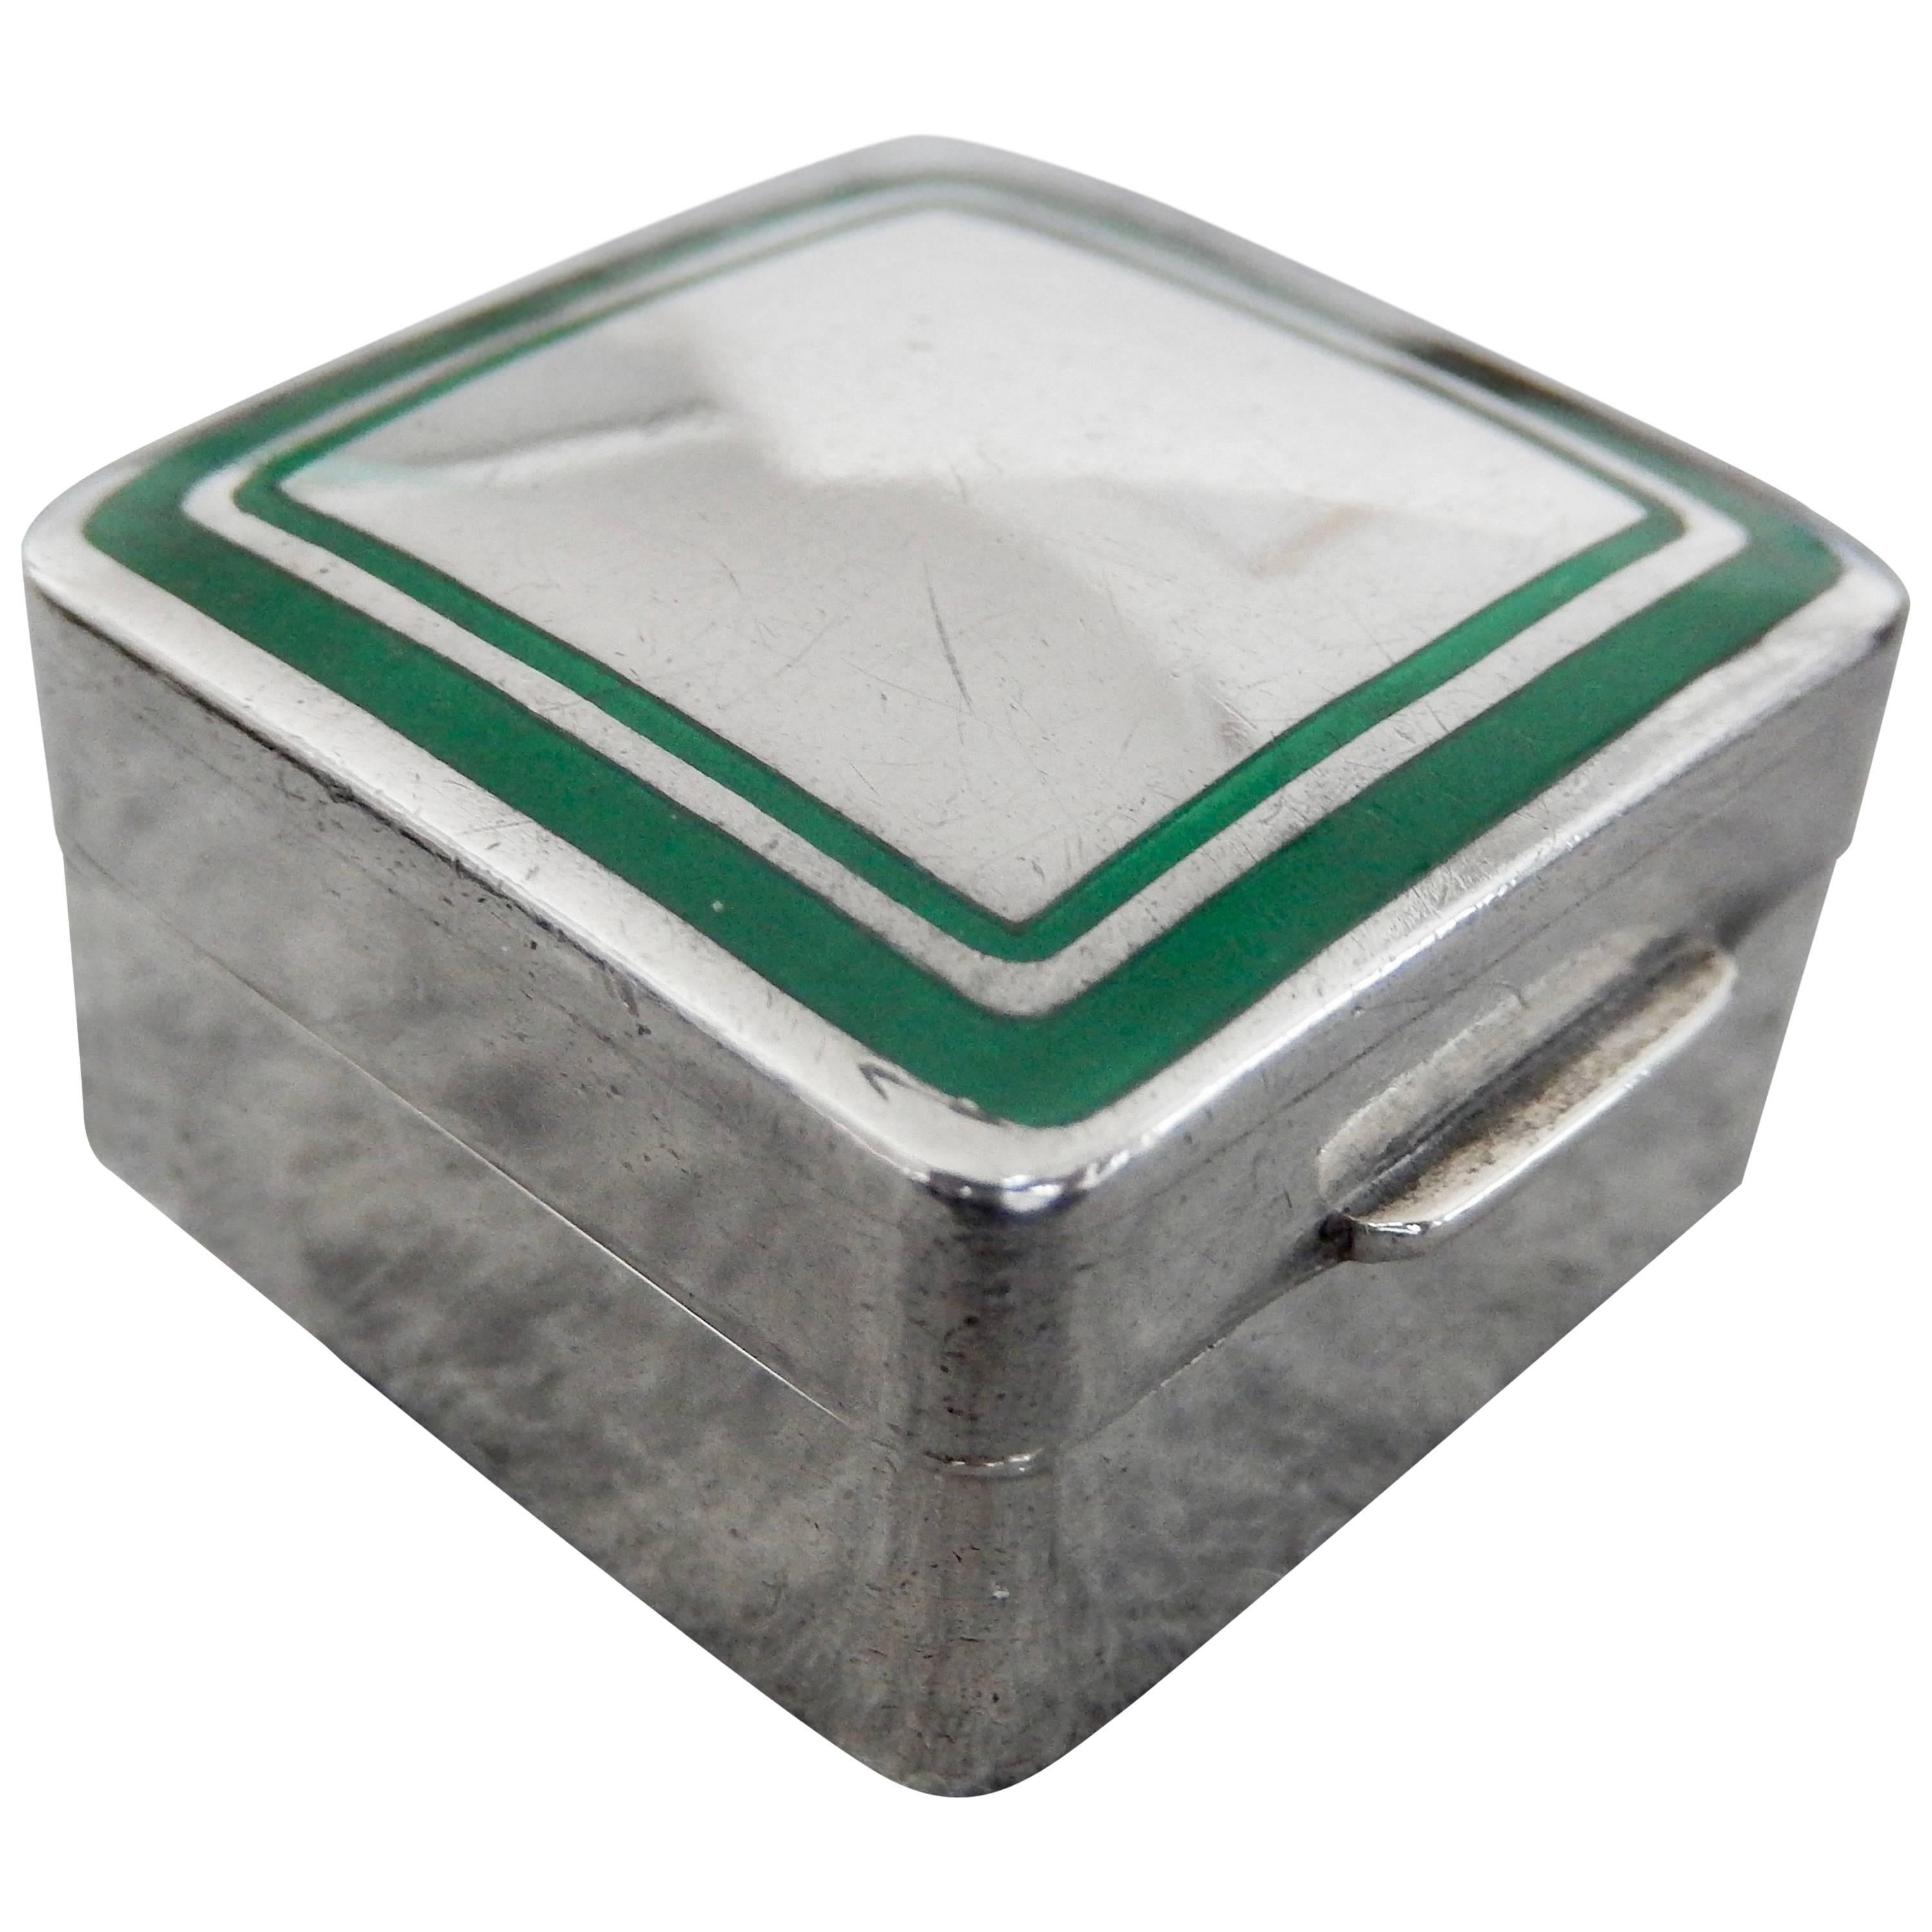 1970s Cartier Sterling Silver and Enamel Pillbox